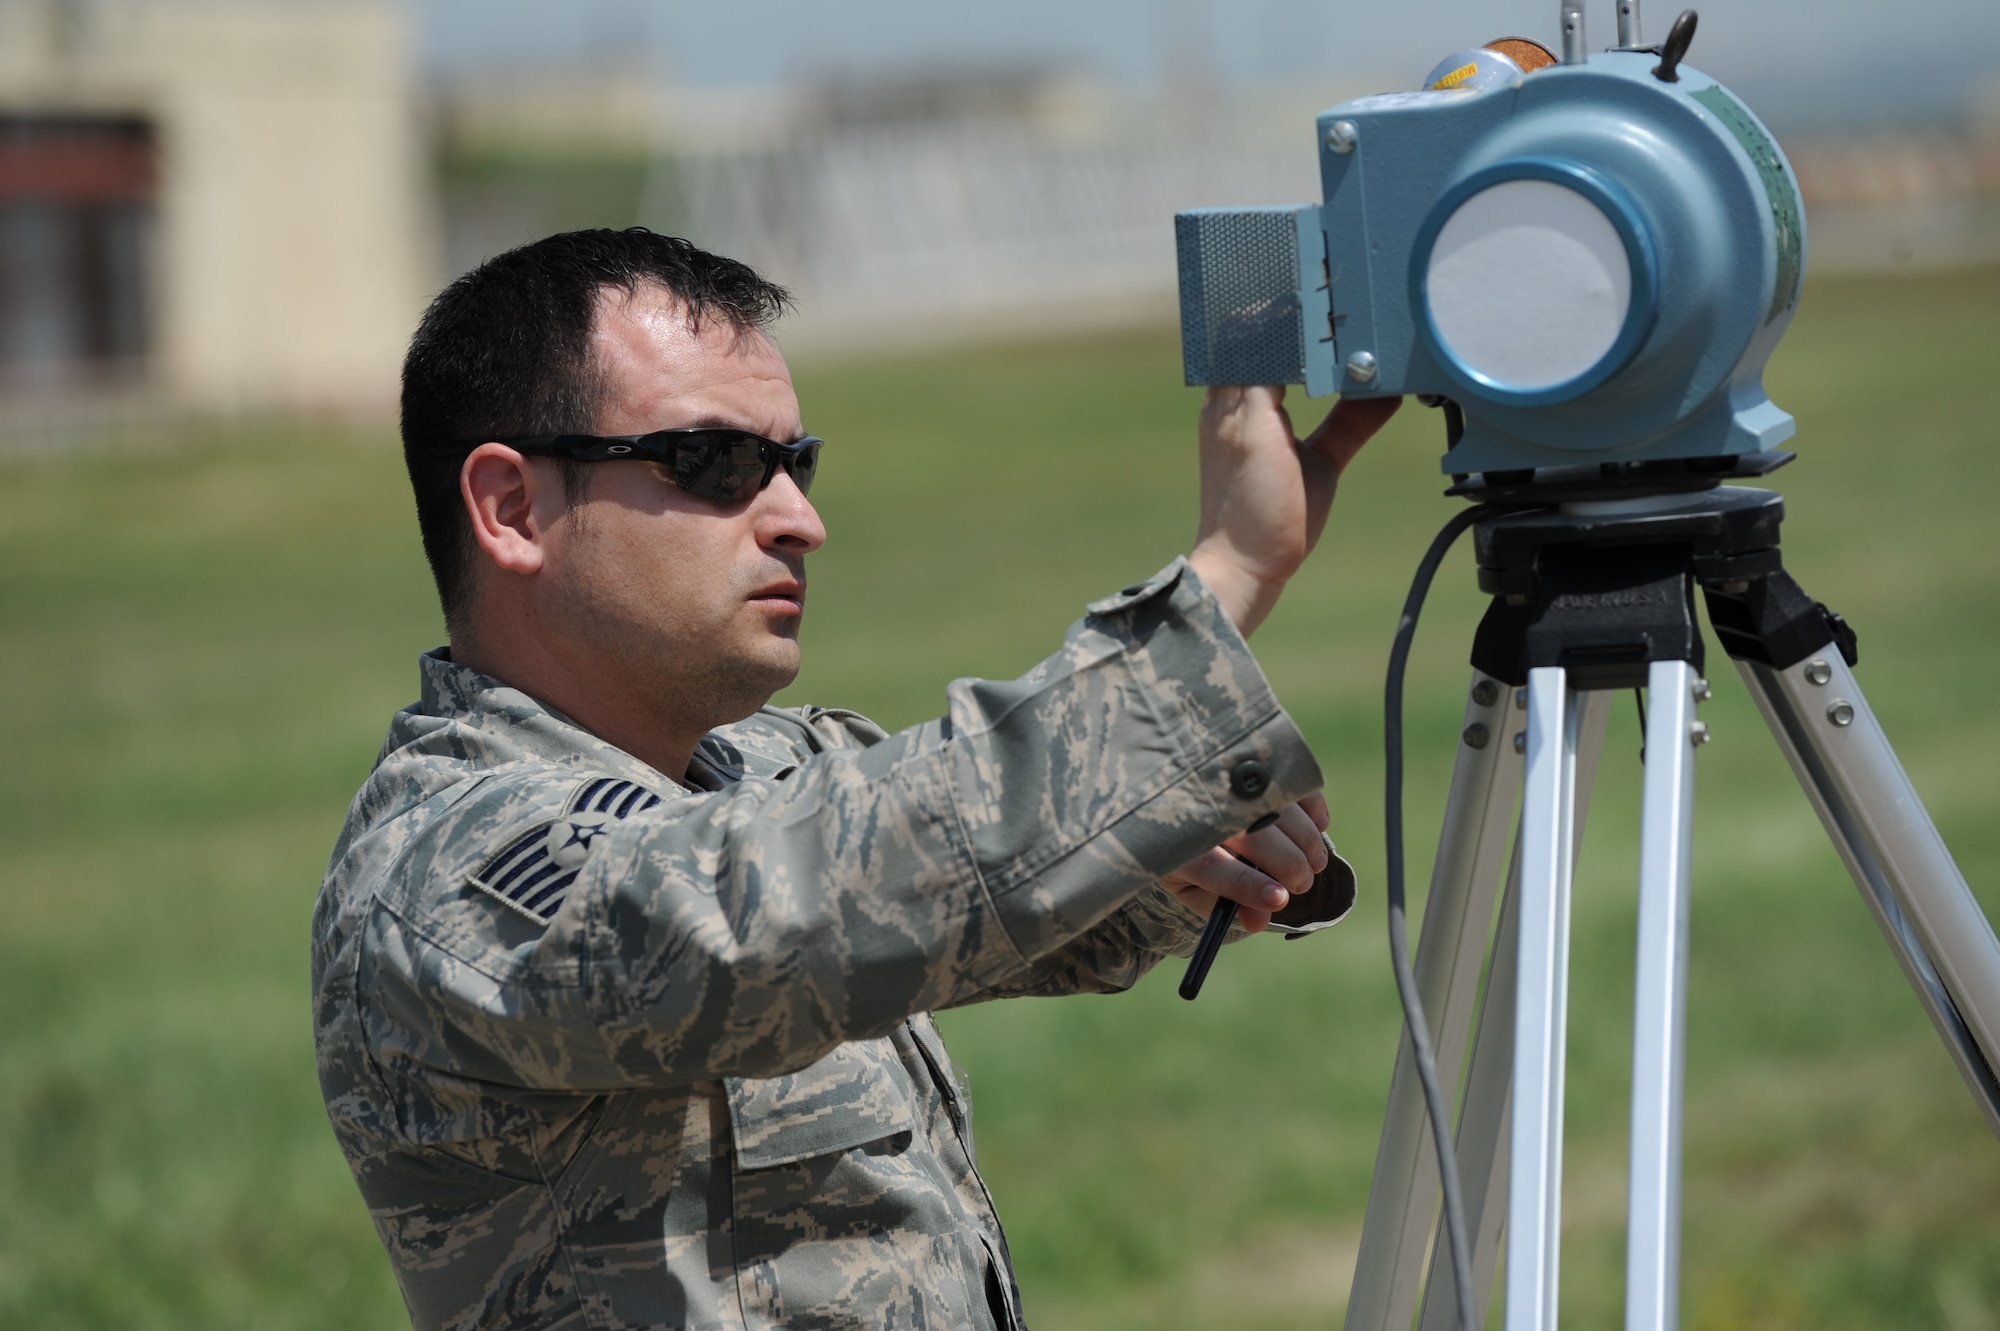 Tech. Sgt. Jacob Romero, 39th Medical Operations Squadron bioenvironmental engineering craftsman, sets up an air sampler to determine what personal protective equipment first responders should don during a field training exercise April 27, 2012, at Incirlik Air Base, Turkey. The exercise tested emergency management's ability to respond effectively to an incident. (U.S. Air Force photo by Senior Airman Jarvie Z. Wallace/Released)